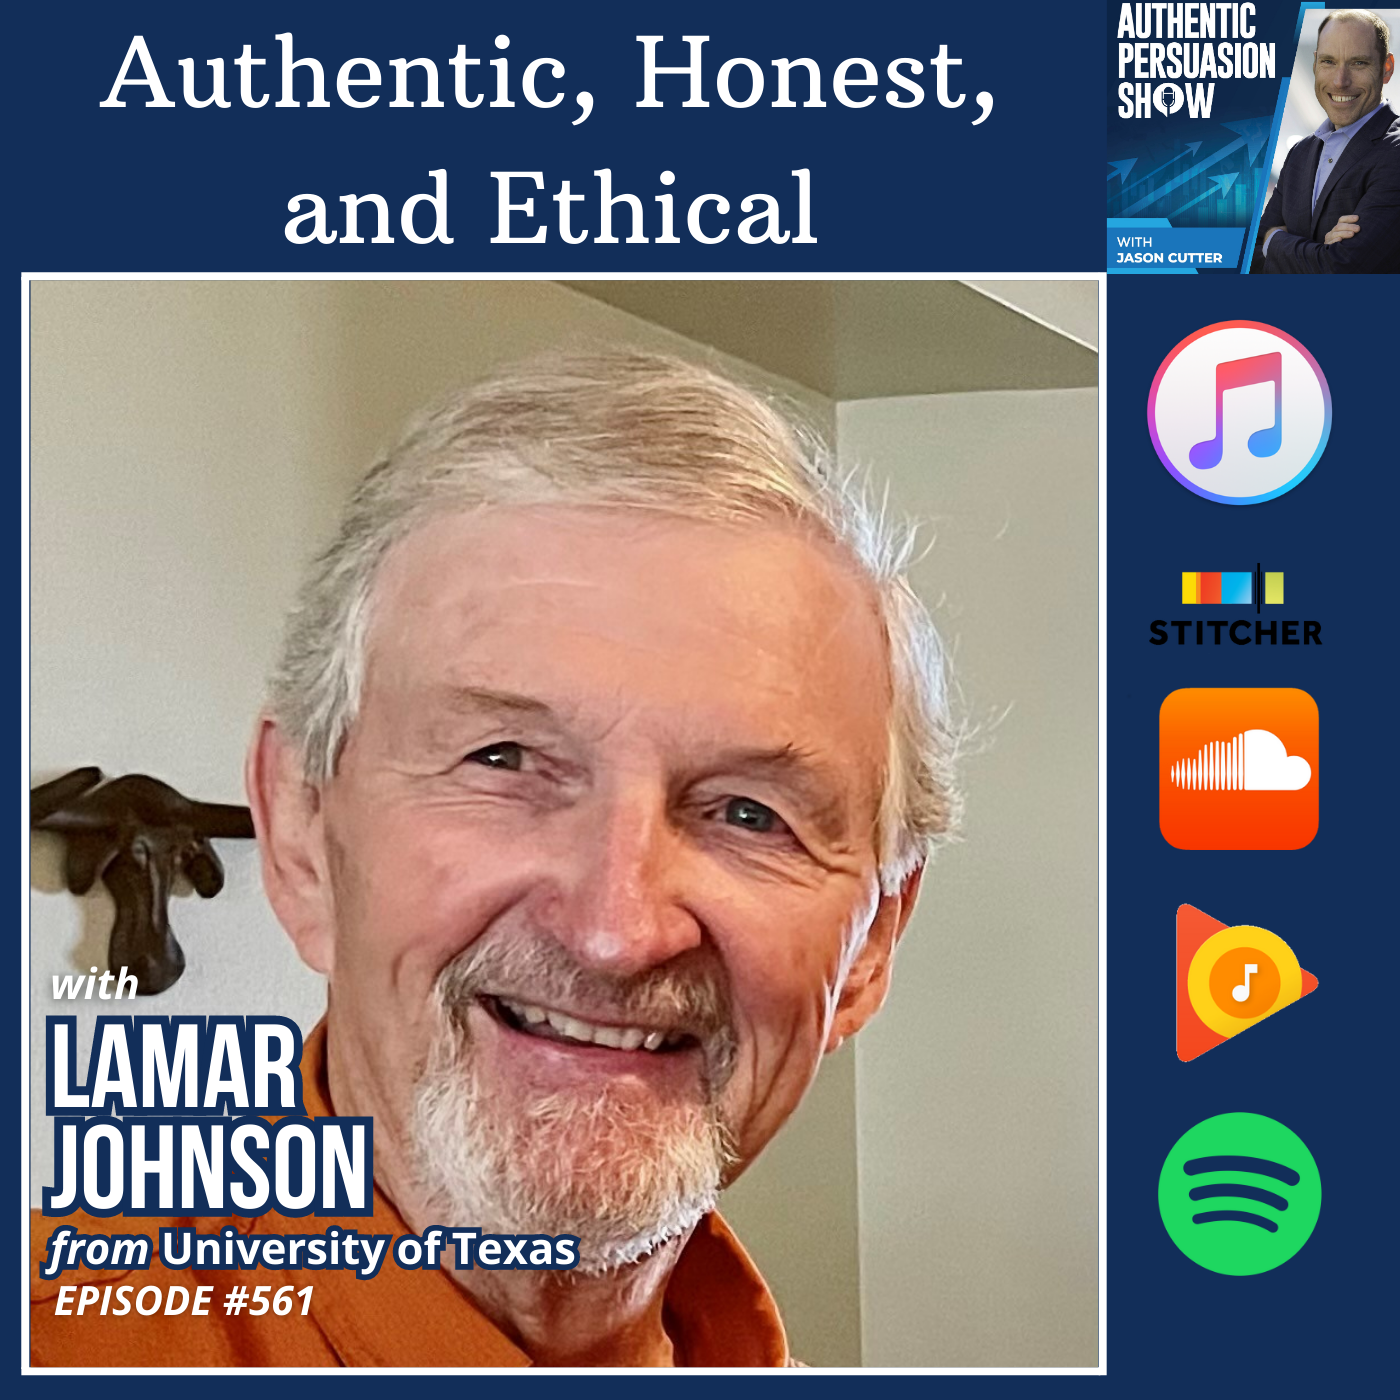 [561] Authentic, Honest, and Ethical, with Lamar Johnson from University of Texas